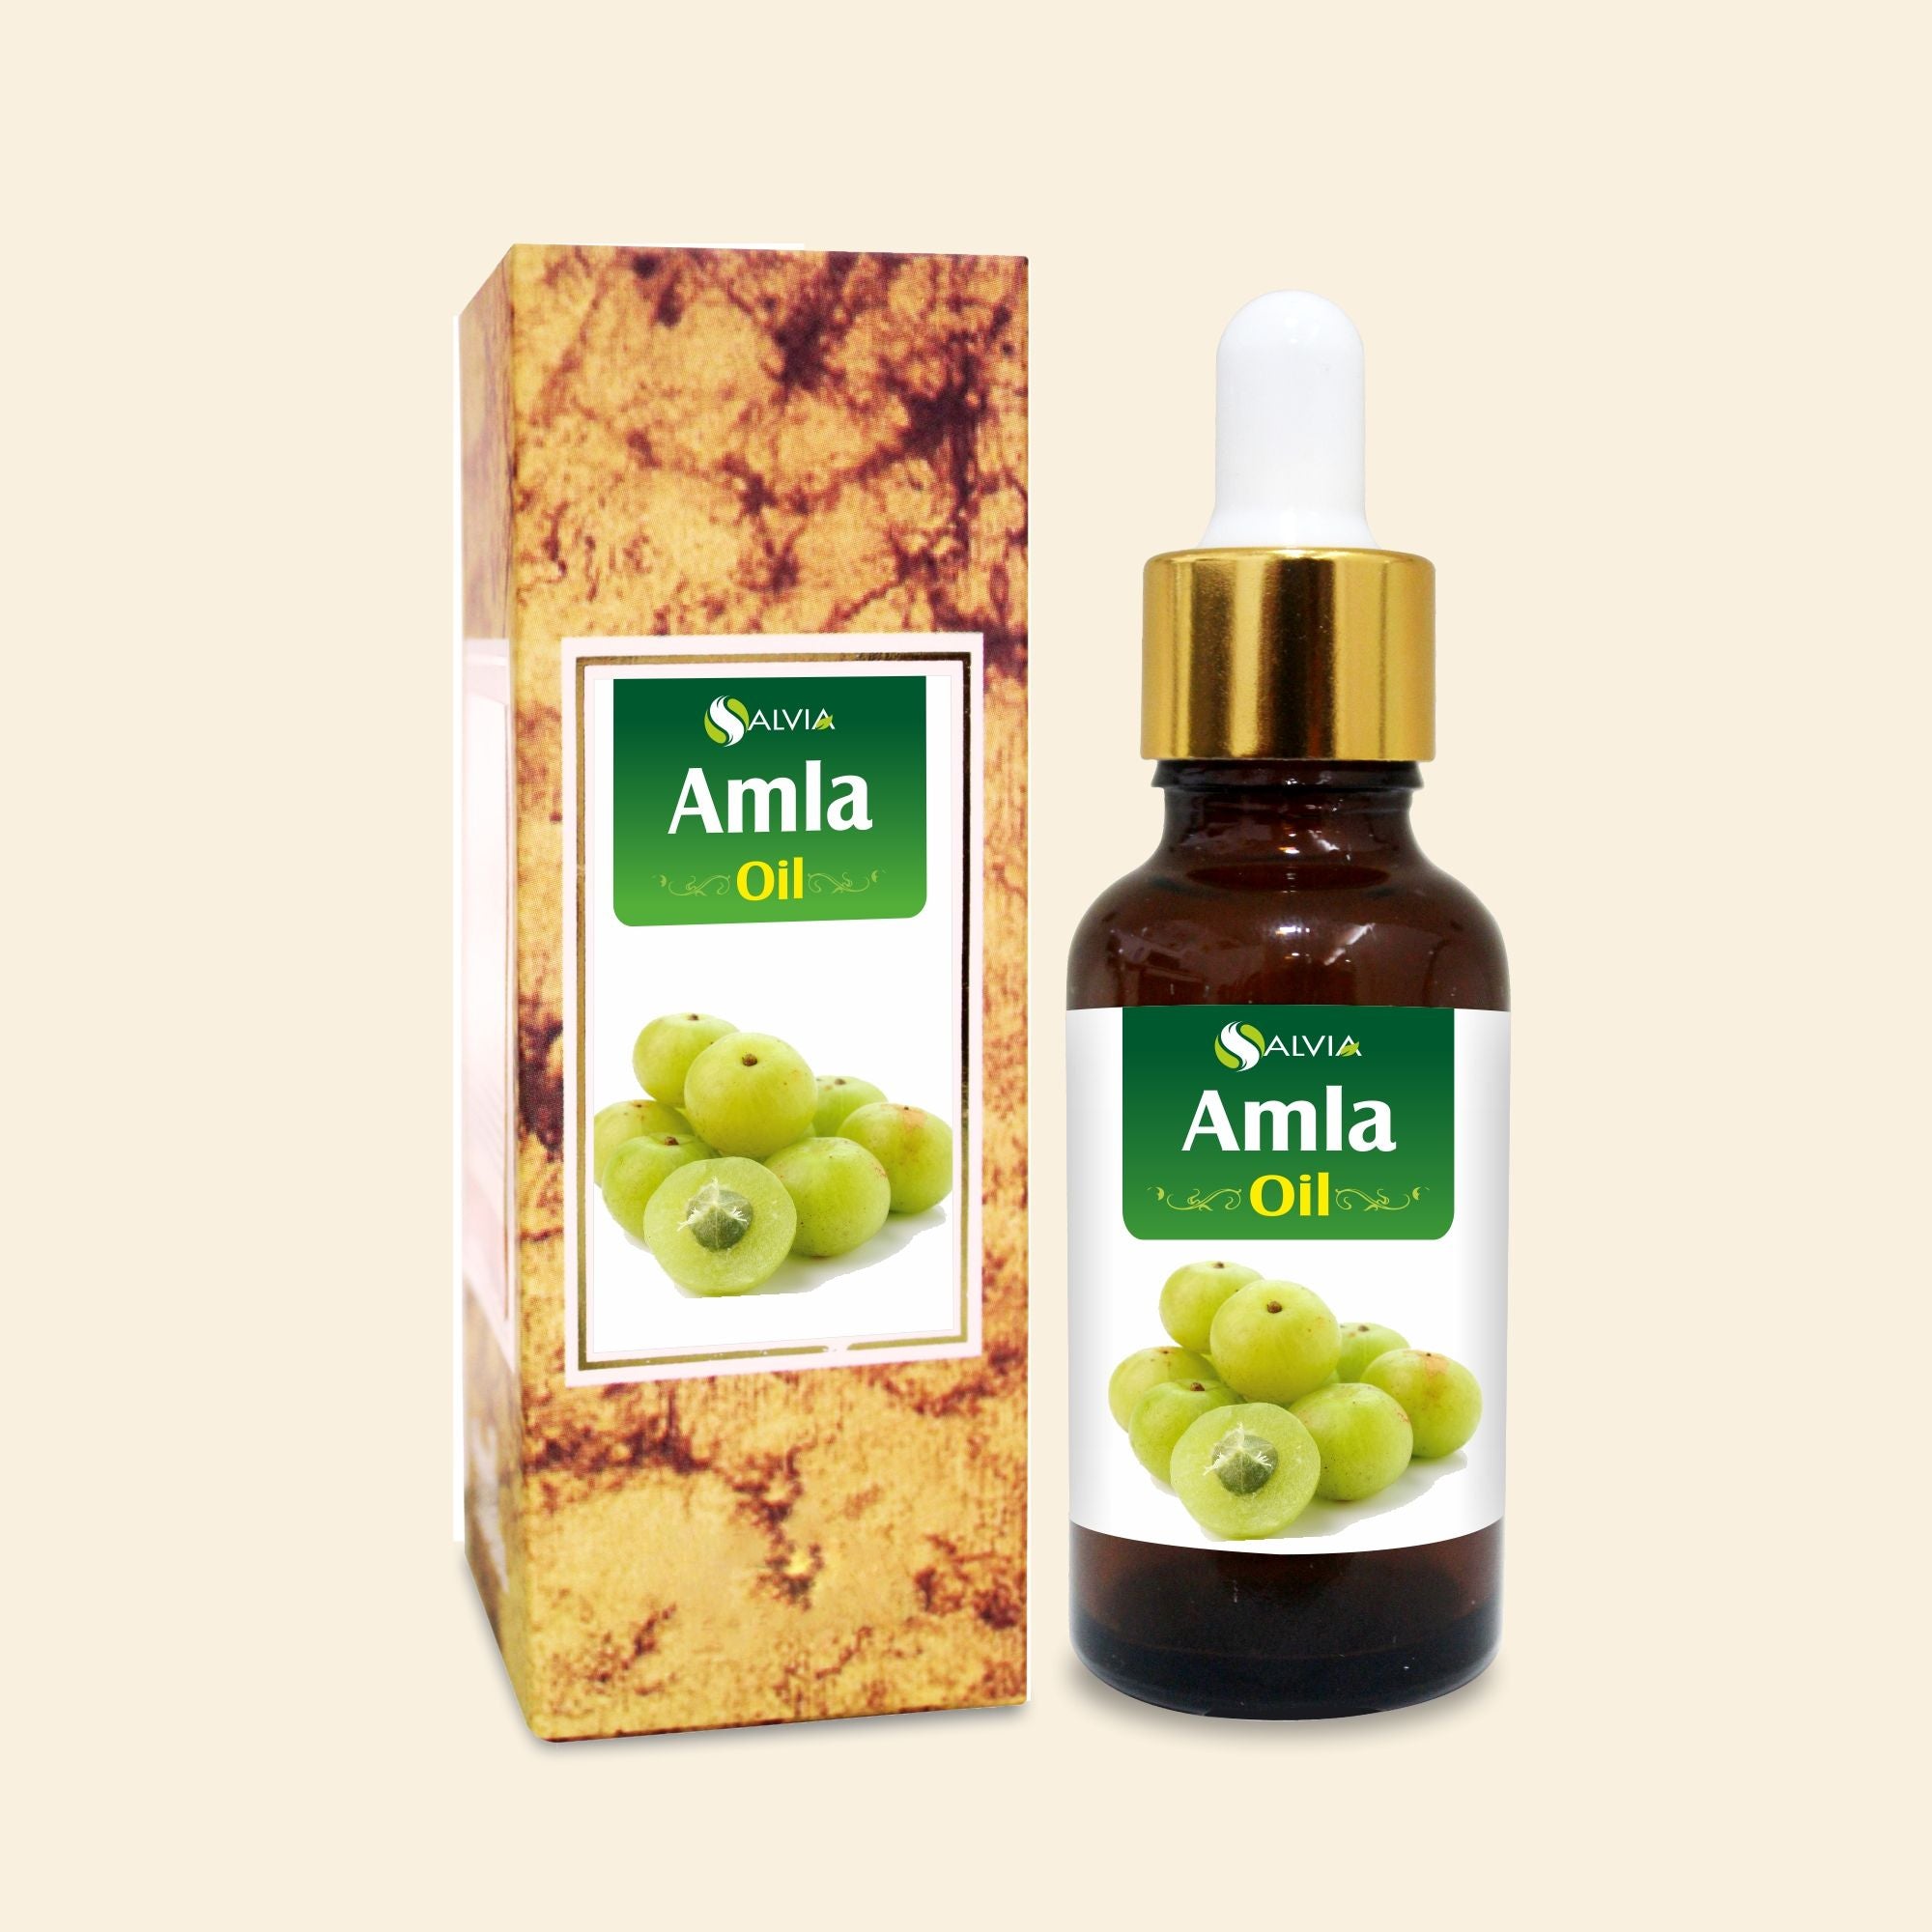 Salvia Natural Essential Oils,Infused Oils,Anti hair fall oil Amla Oil for hair care & skin